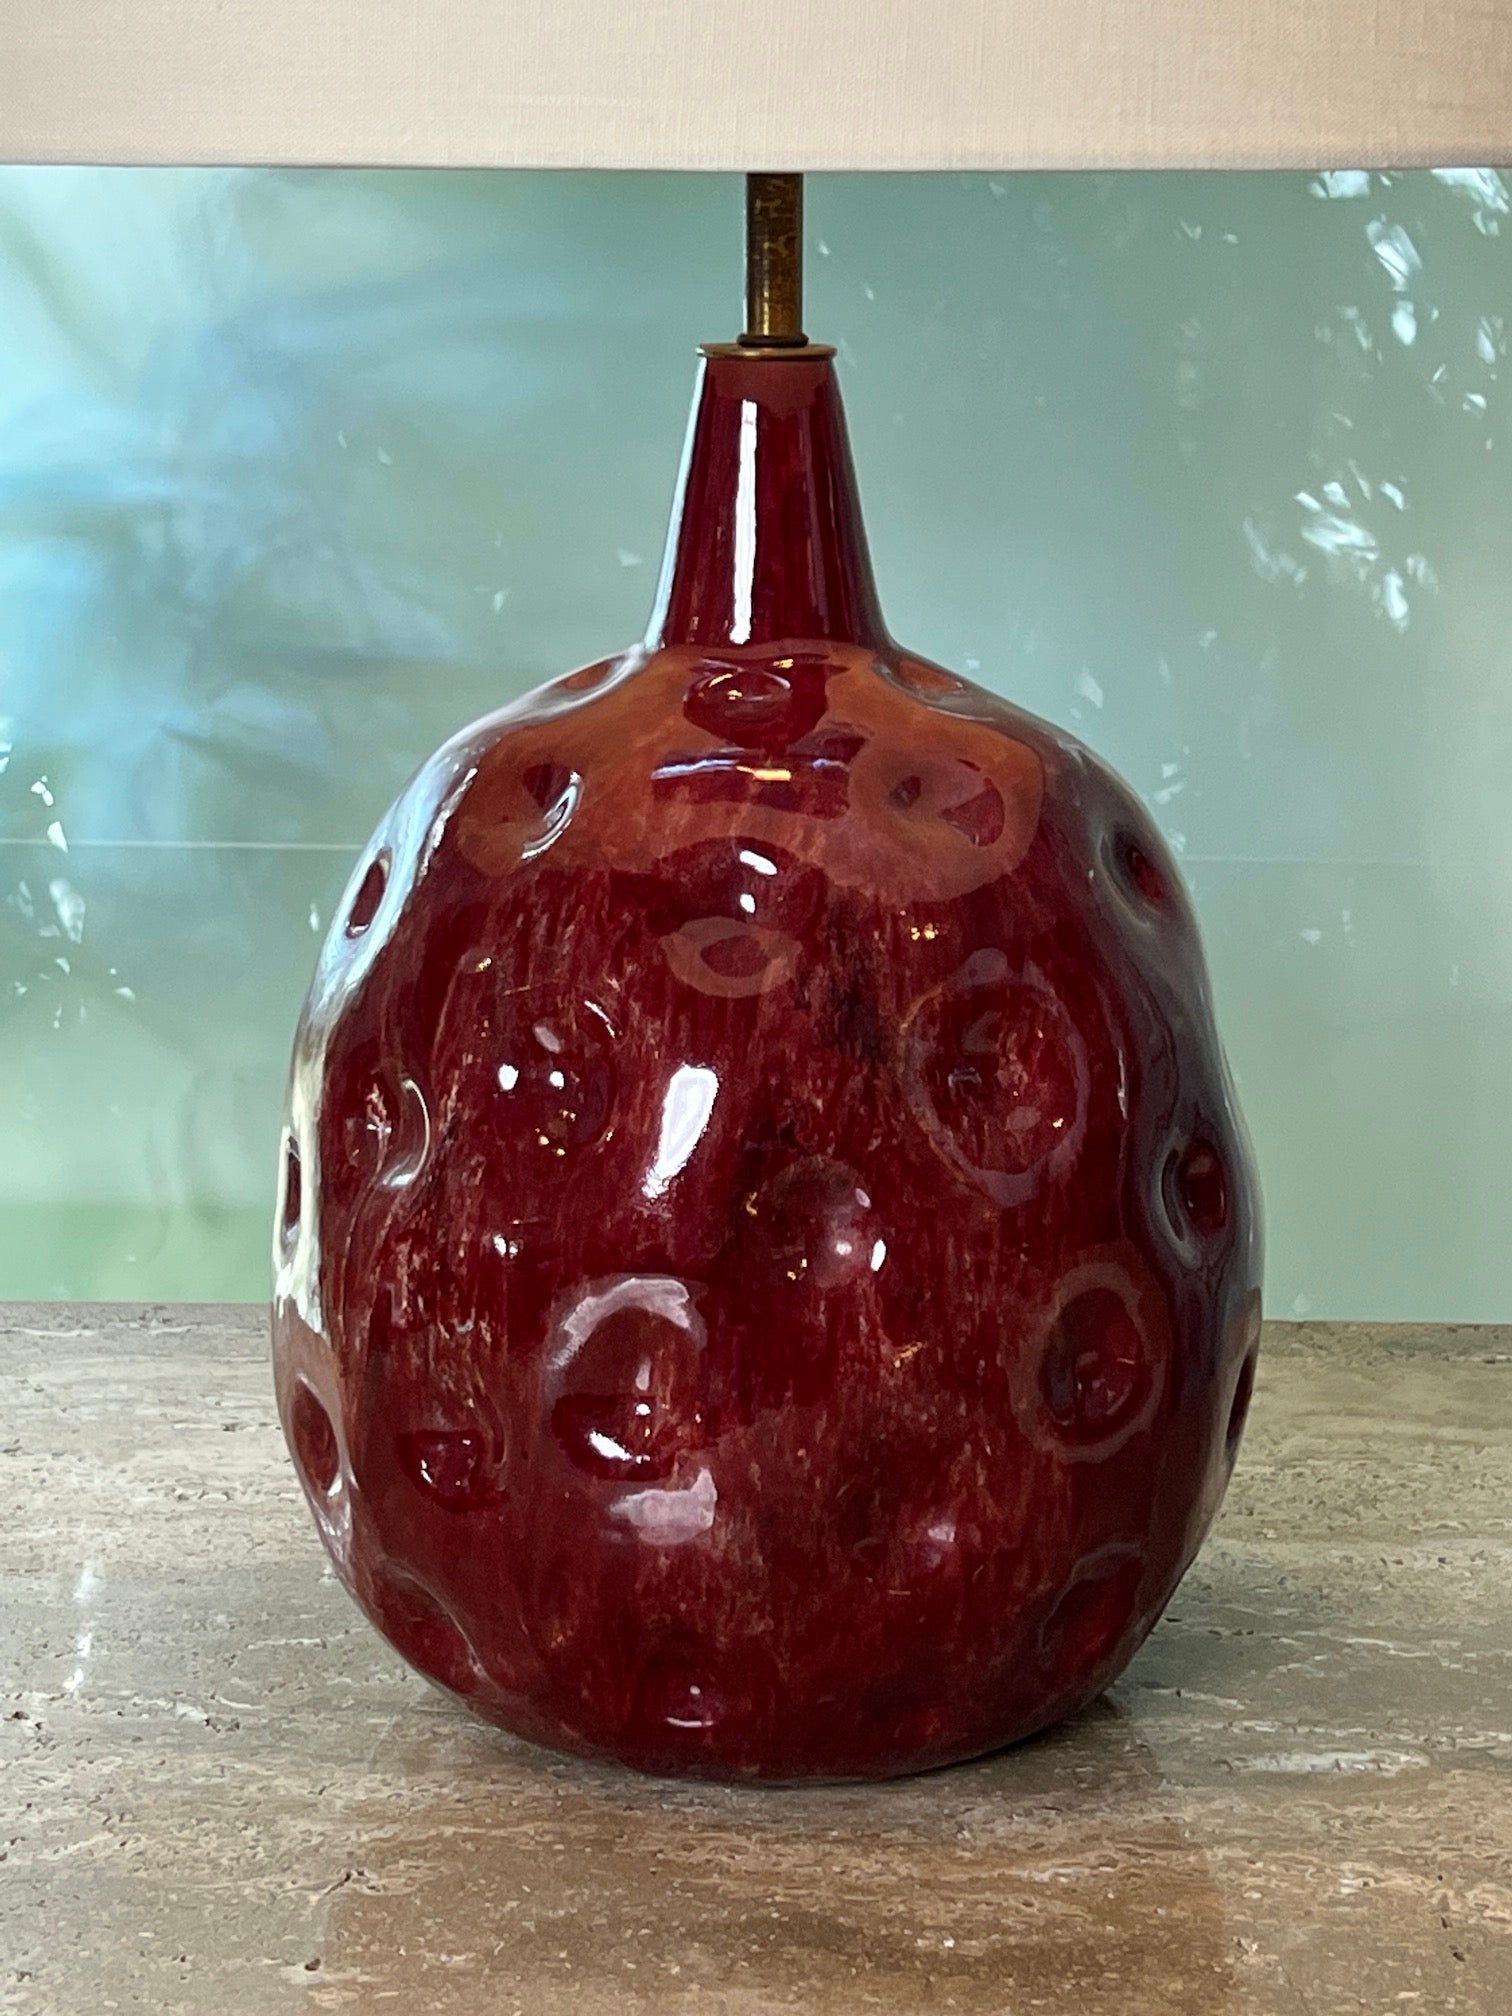 A beautifully glazed cranberry colored dimpled ceramic lamp by Marcello Fantoni. Signature to bottom. 
Ceramic measures 12